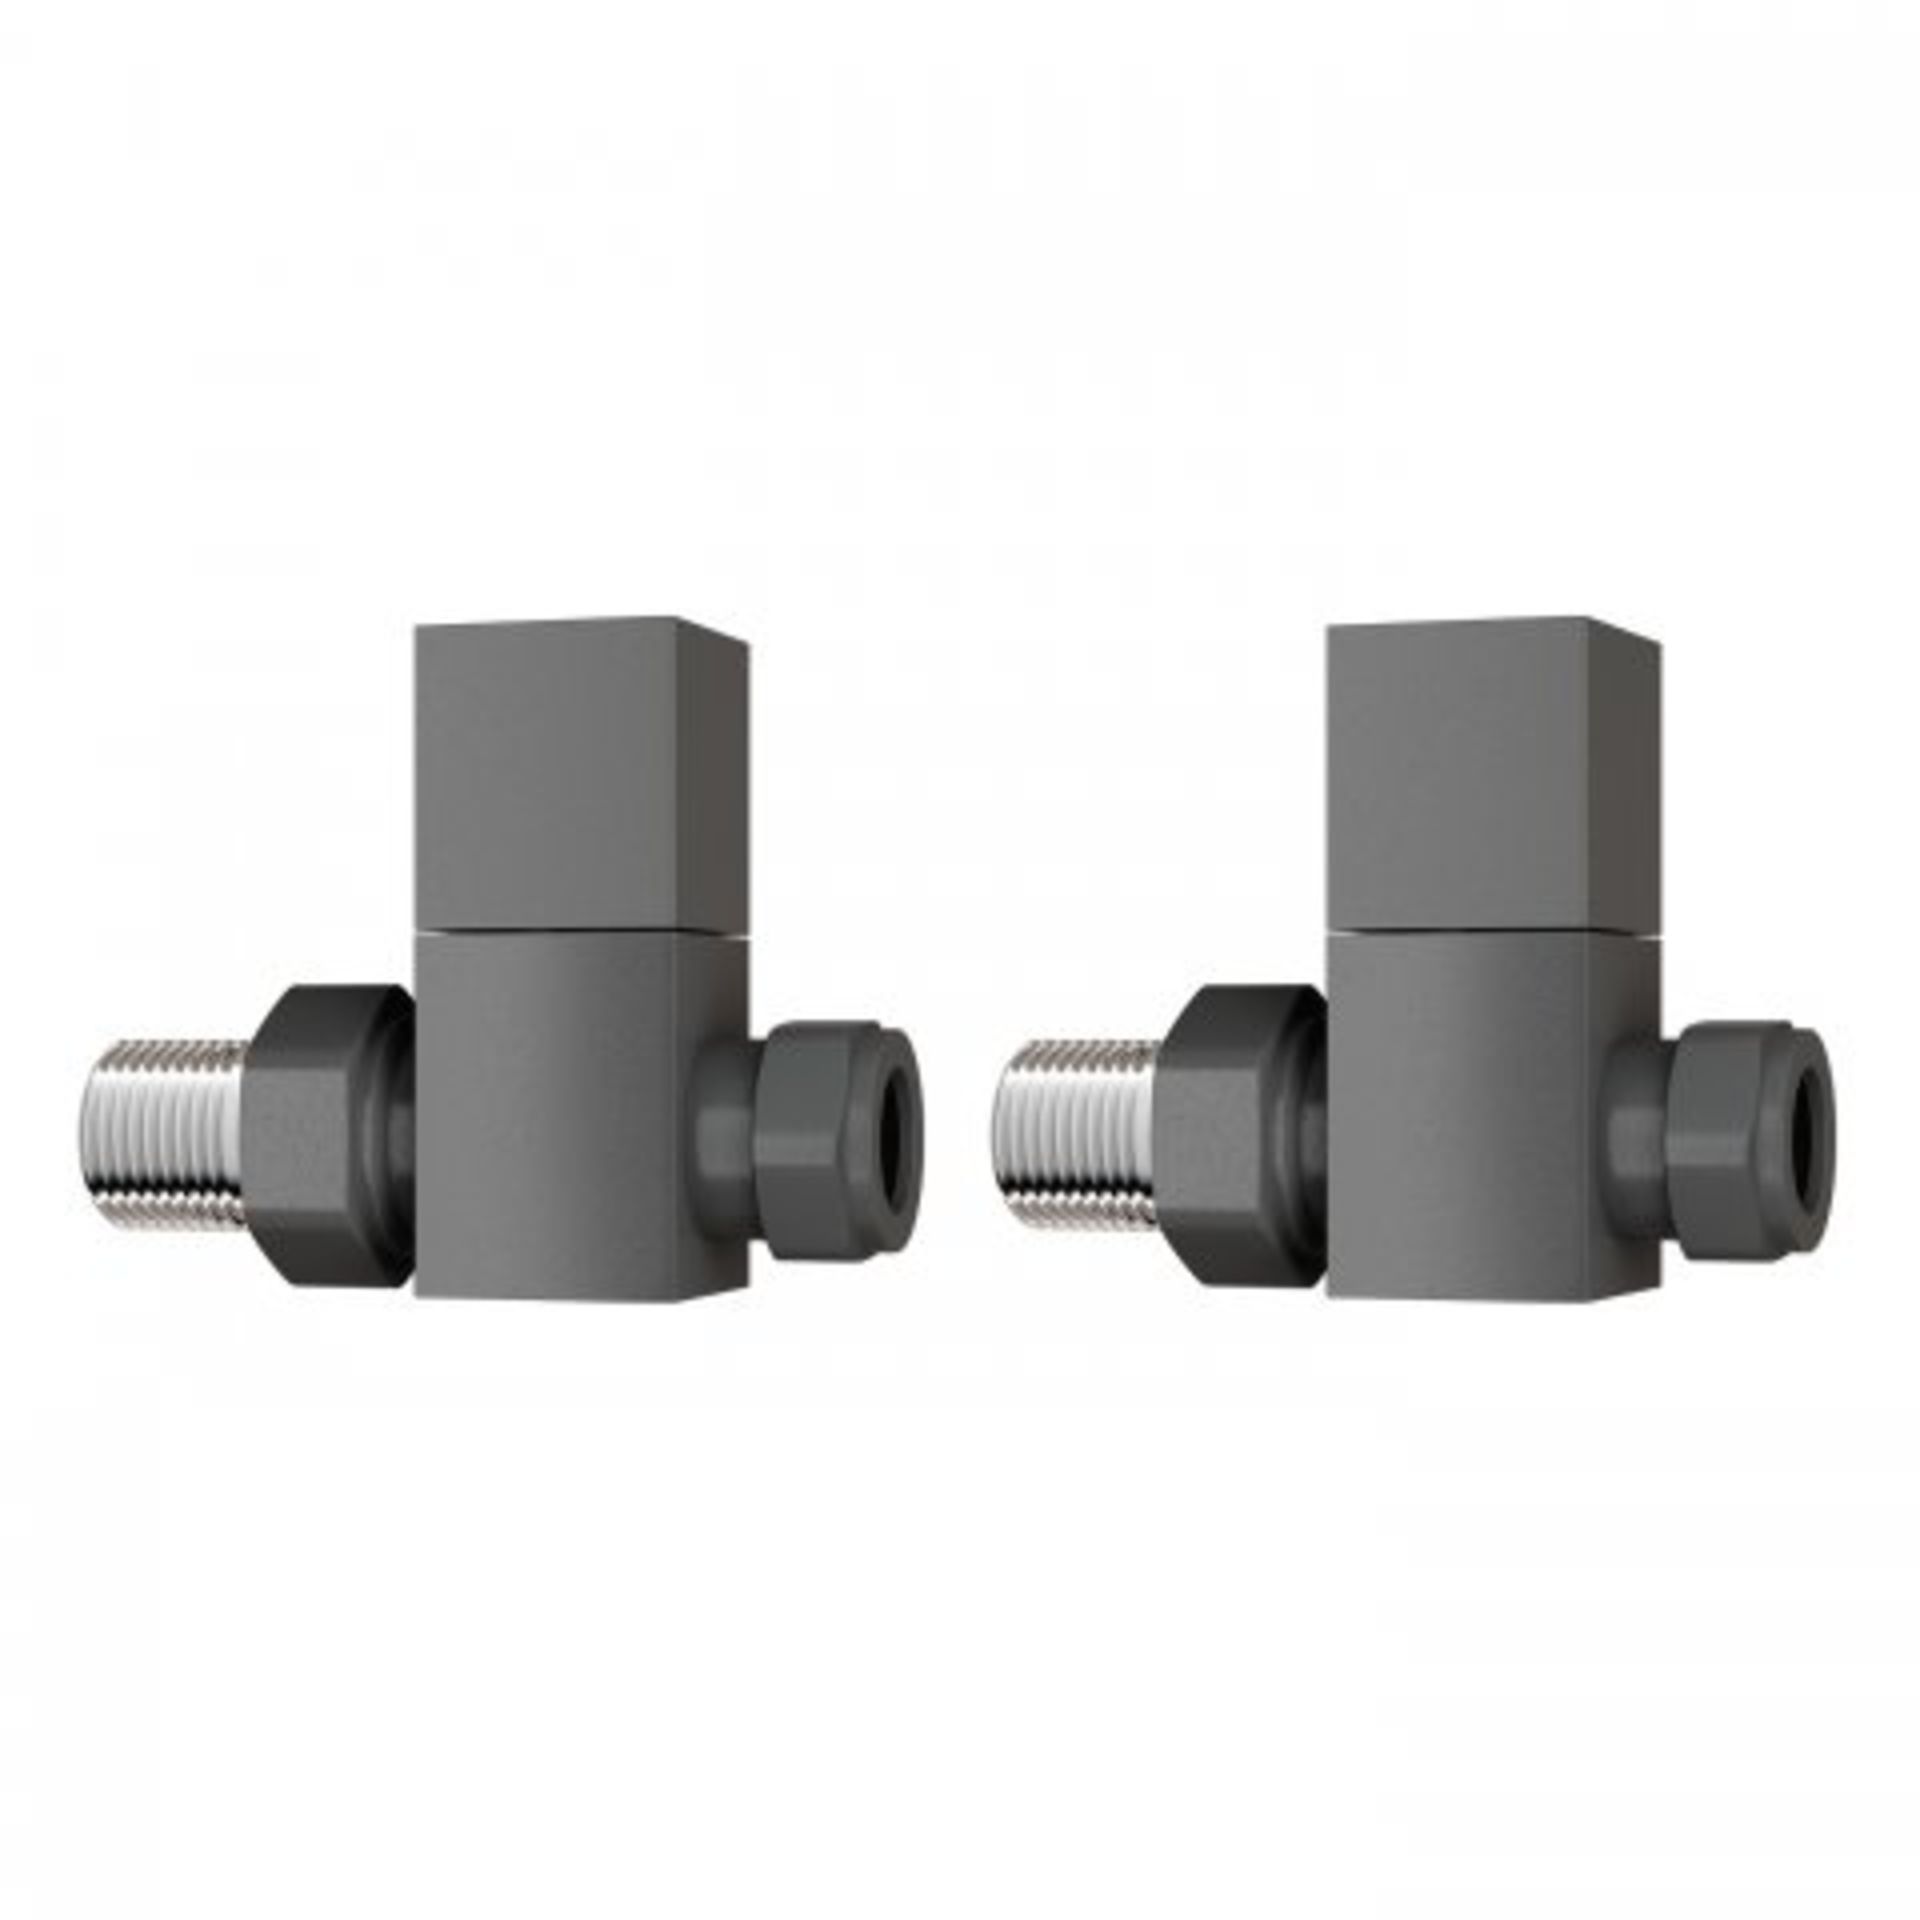 (GC1016) 15mm Standard Connection Square Straight Anthracite Radiator Valves Made of solid bra...